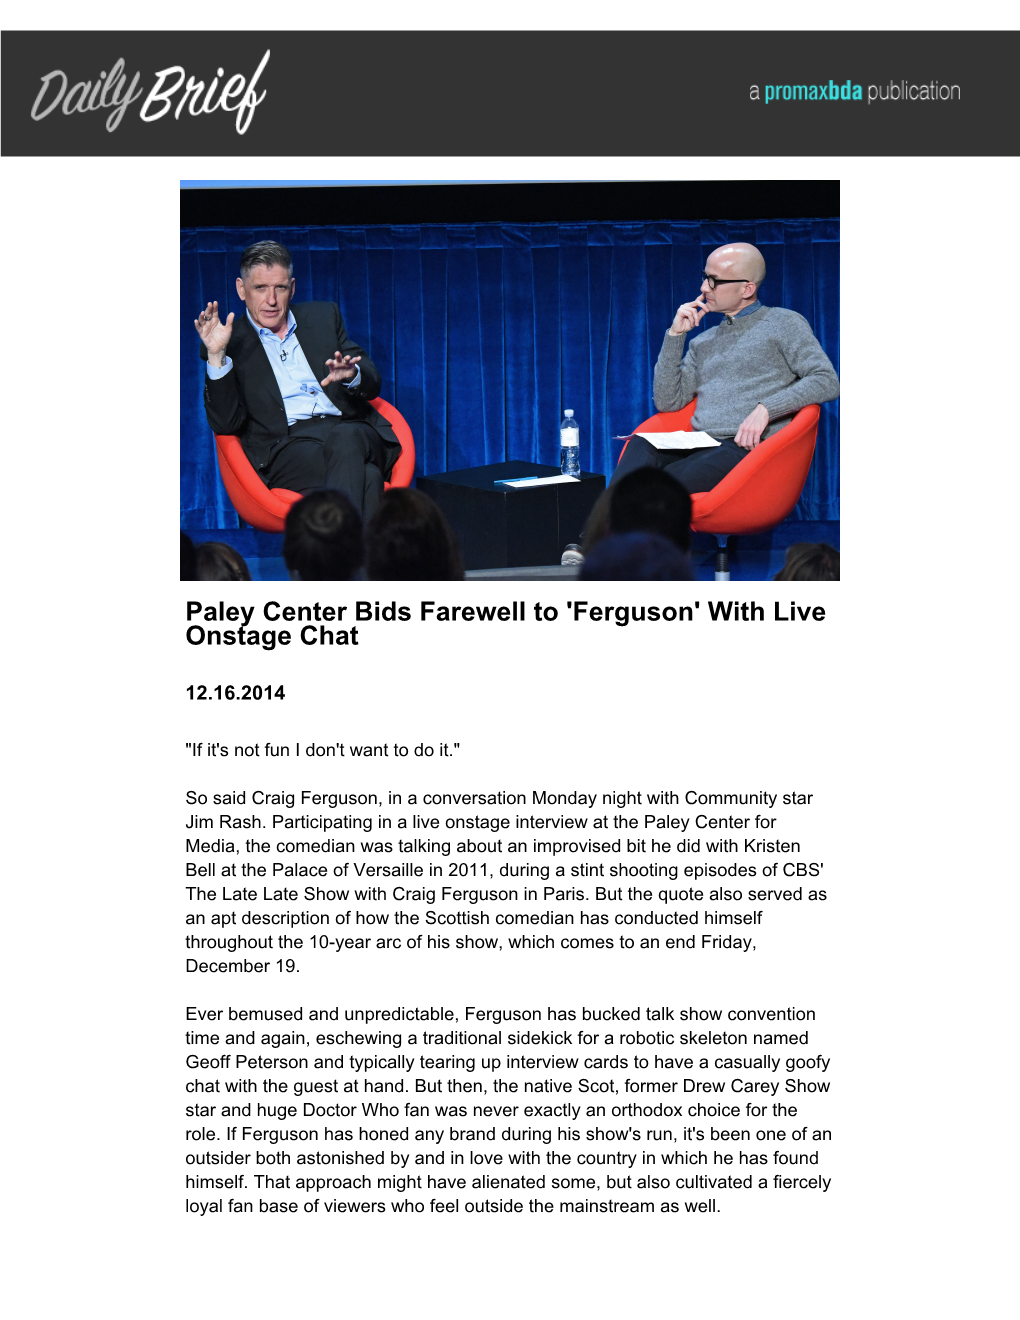 Ferguson' with Live Onstage Chat